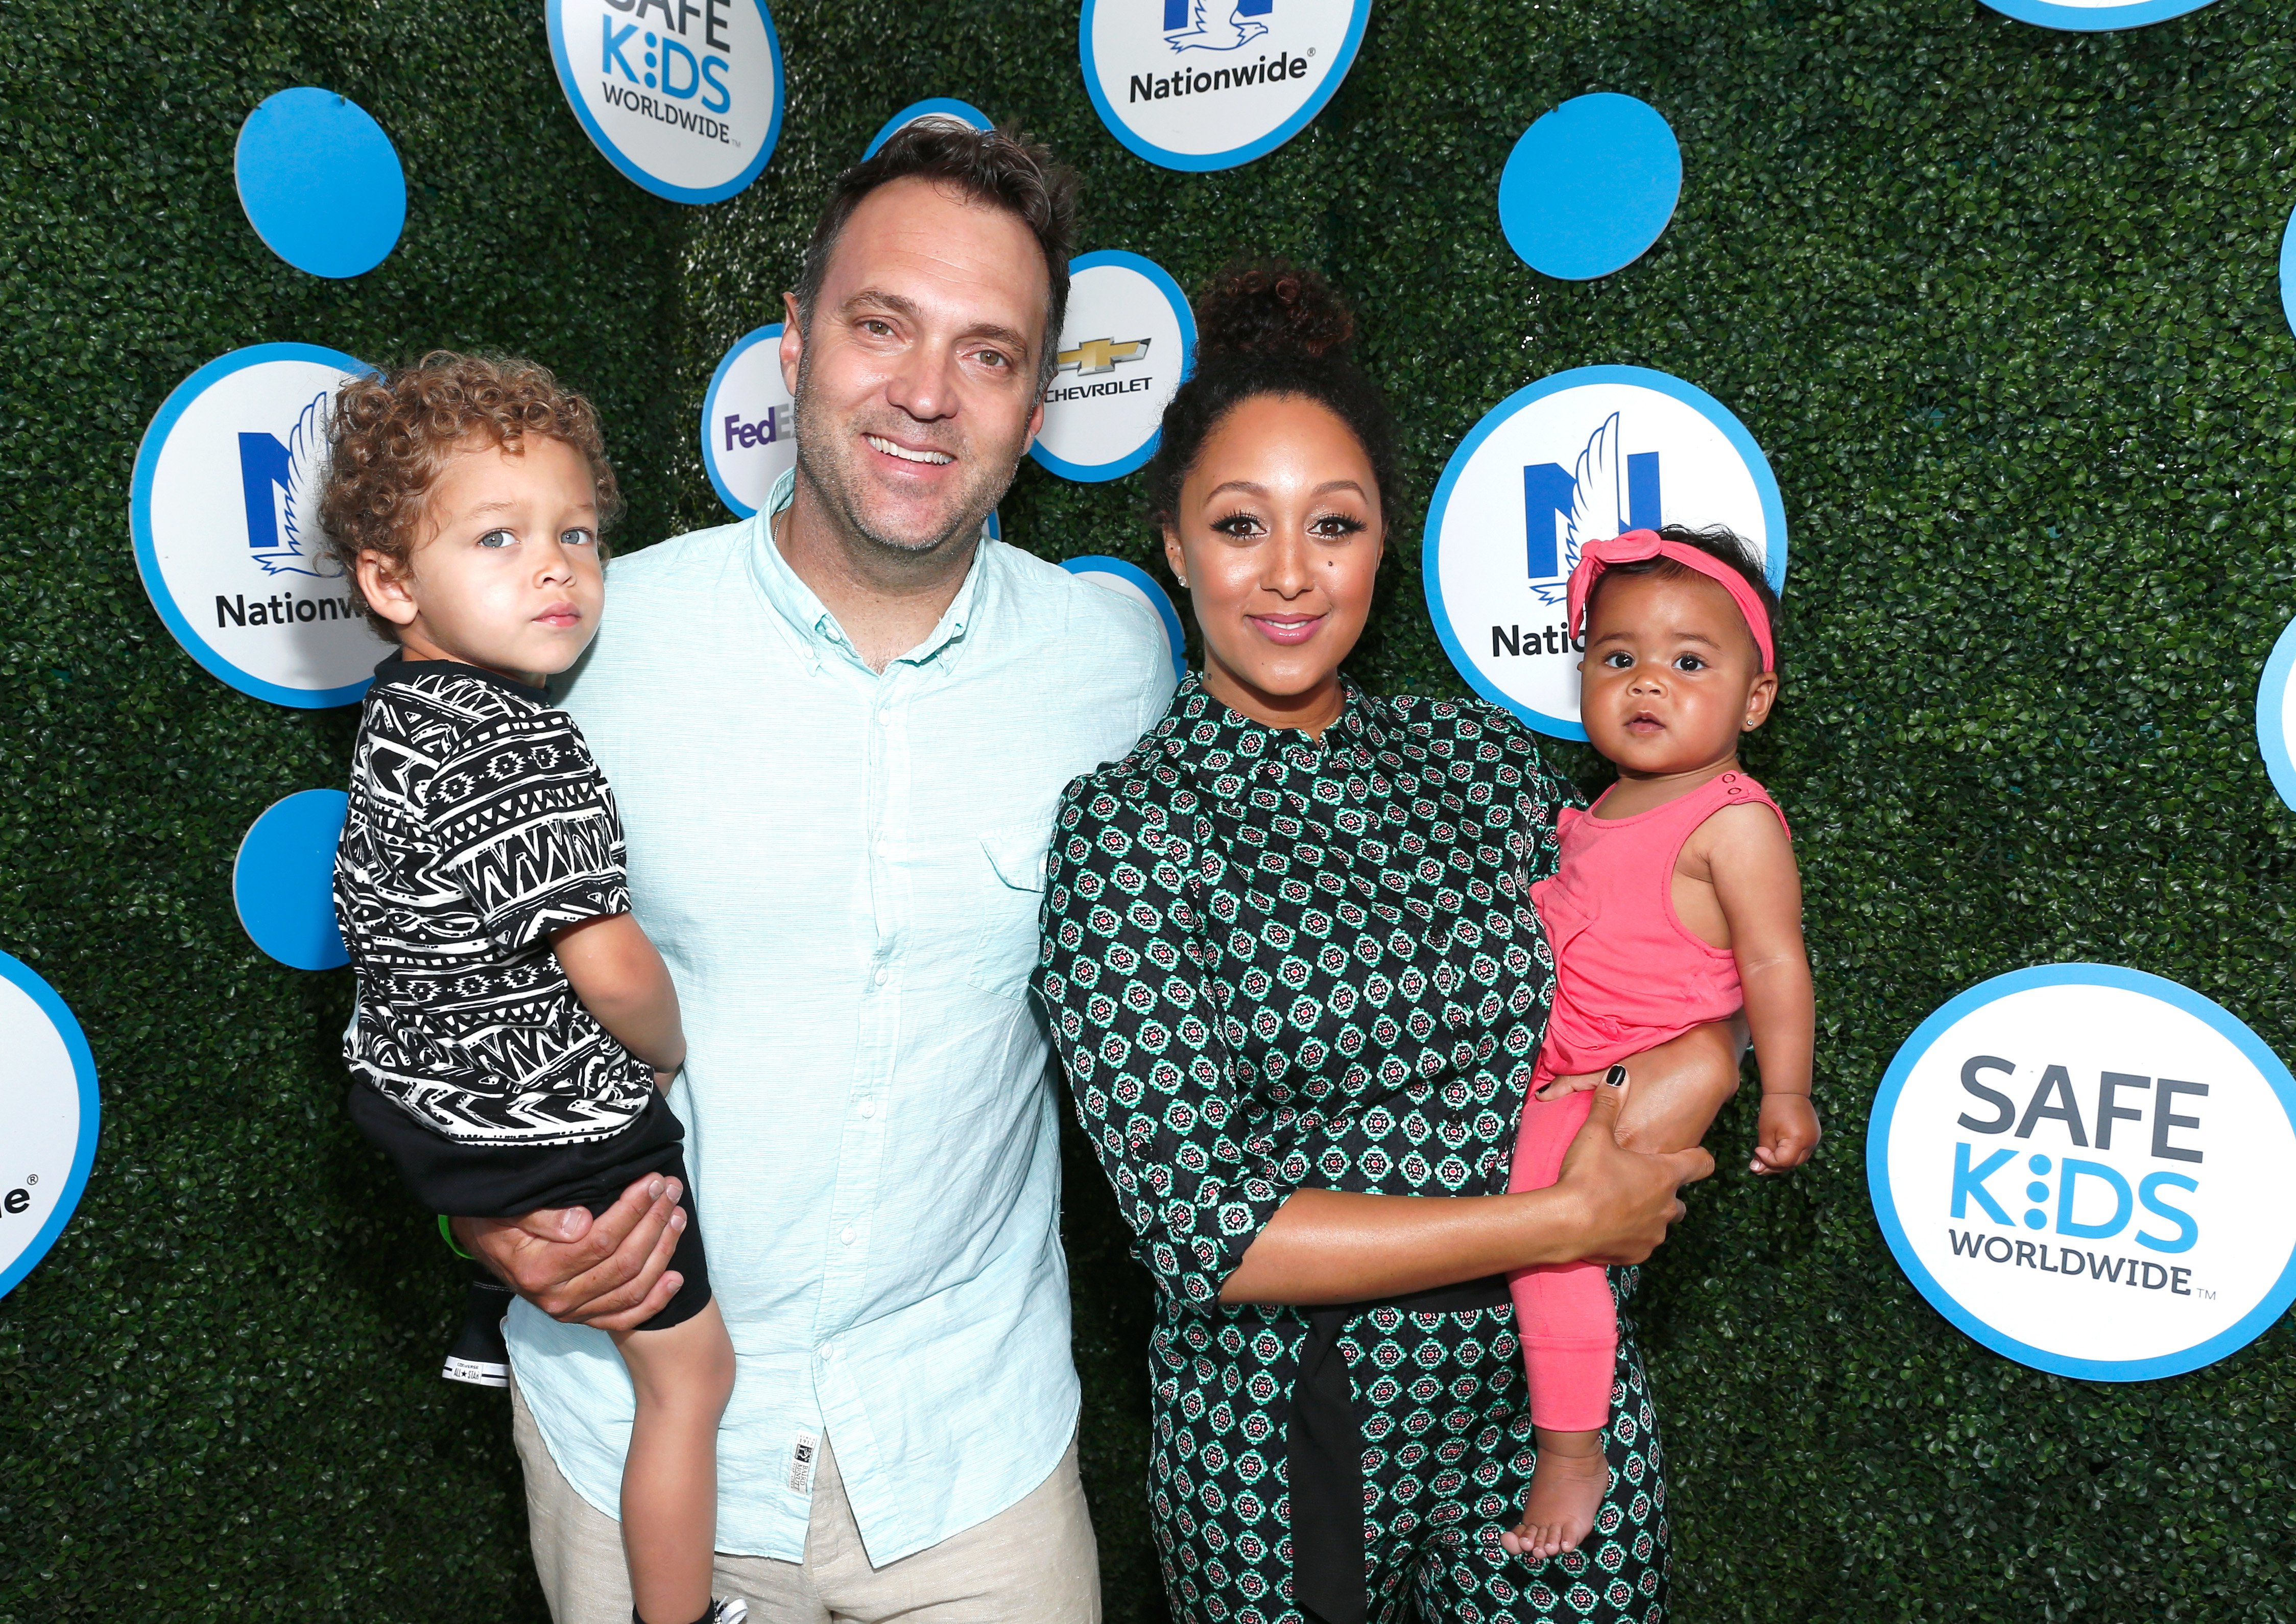 Adam Housley and Tamera Mowry with their two children at the Safe Kids Day at Smashbox Studios on April 24, 2016 in Culver City, California.| Source: Getty Images